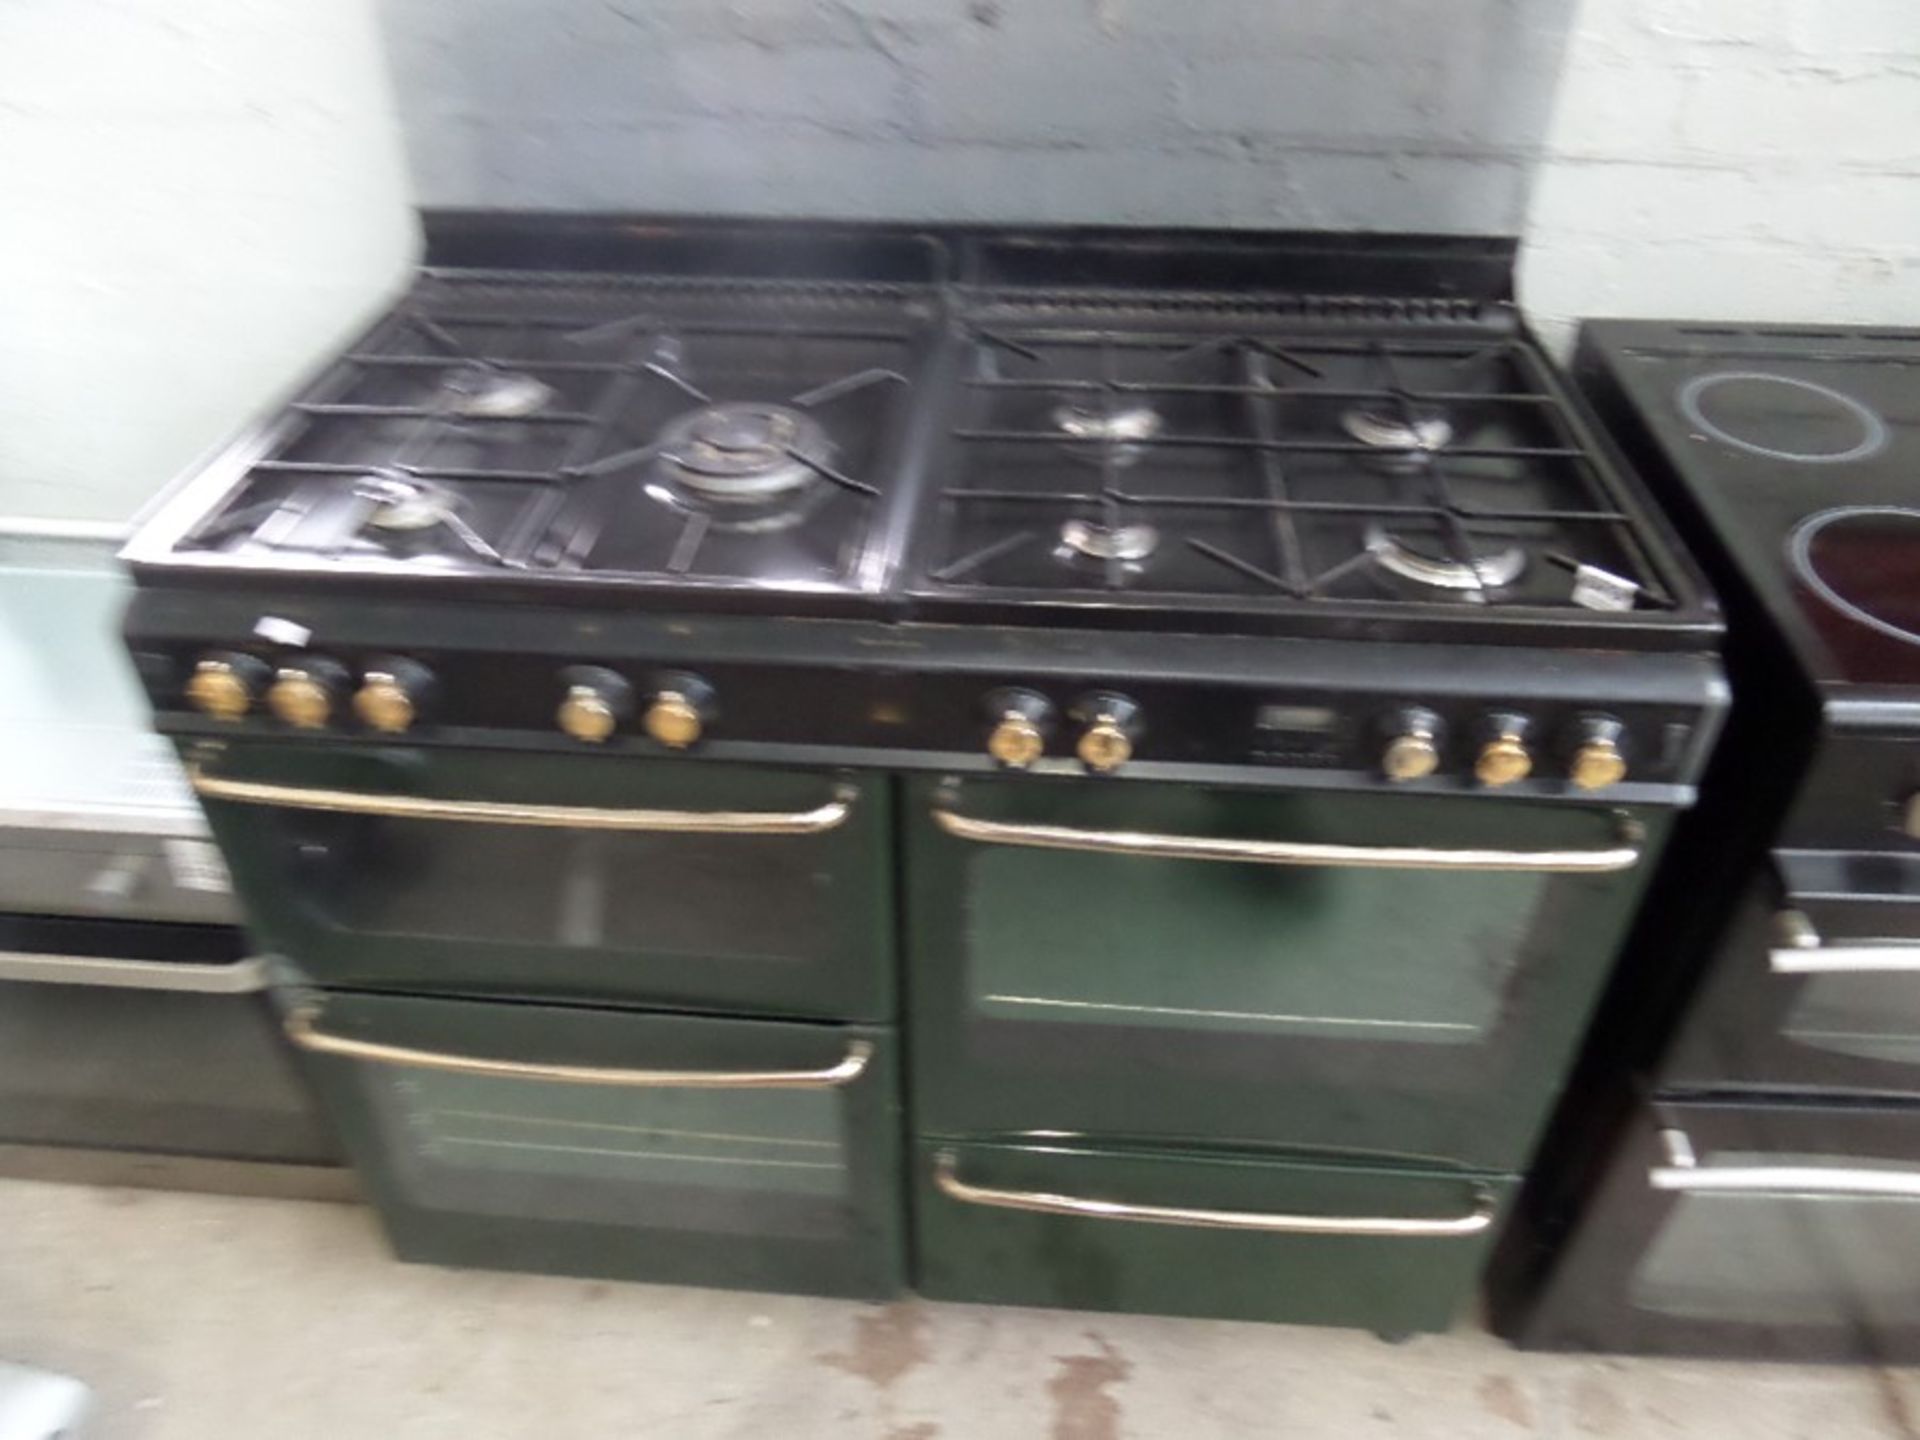 NEW HOME GAS COOKER 2 OVENS/GRILL AND WARMING OVEN